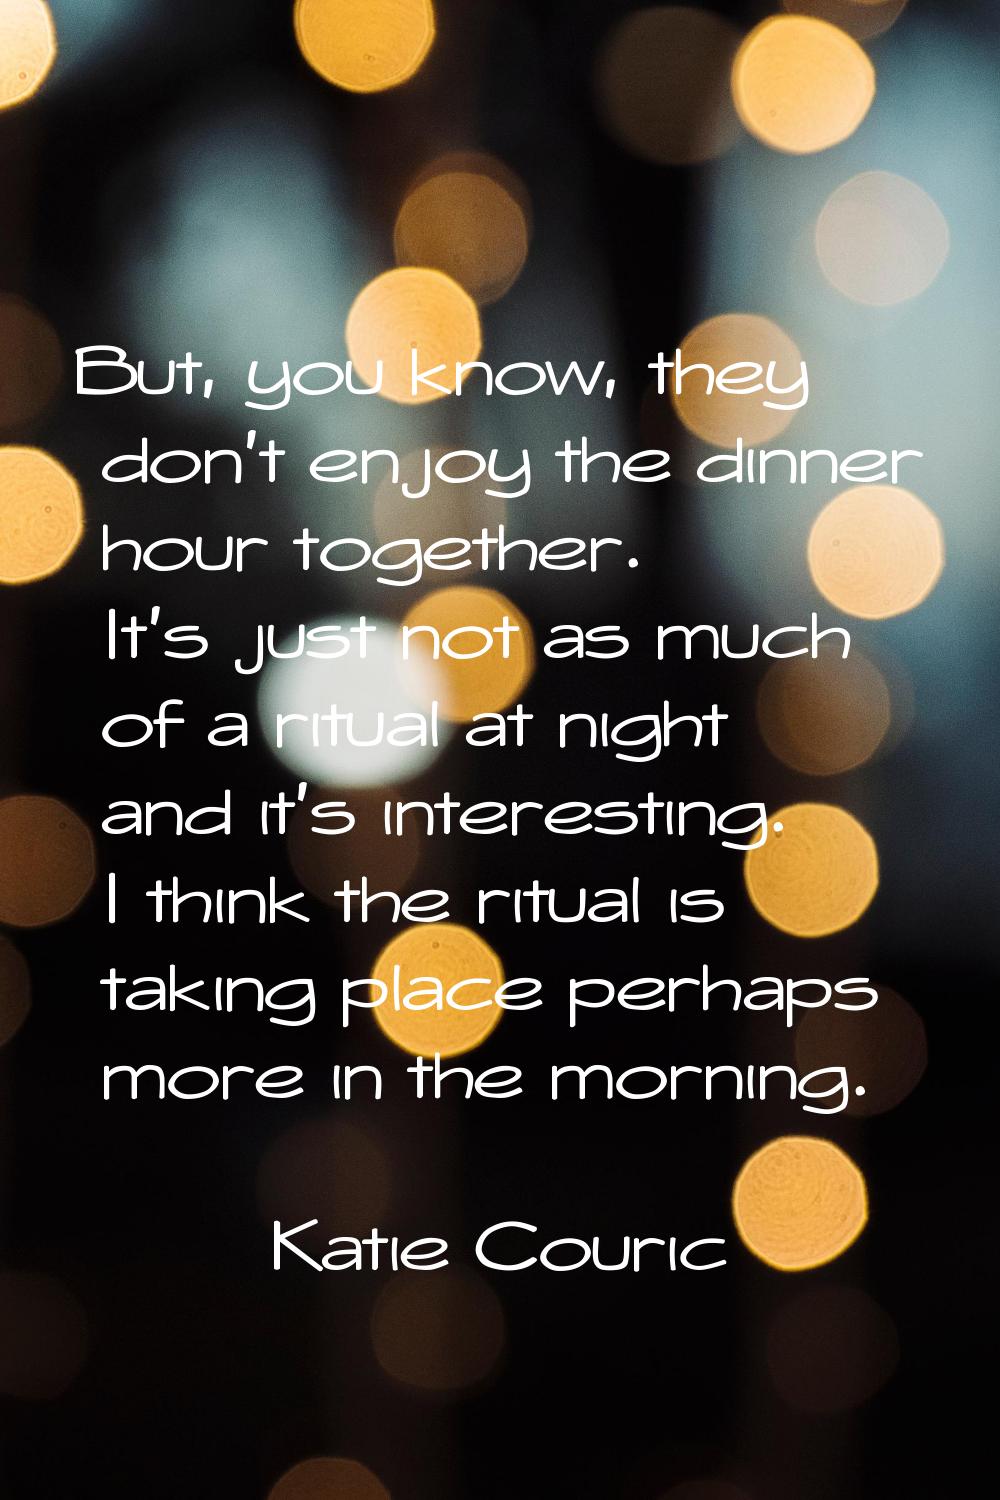 But, you know, they don't enjoy the dinner hour together. It's just not as much of a ritual at nigh